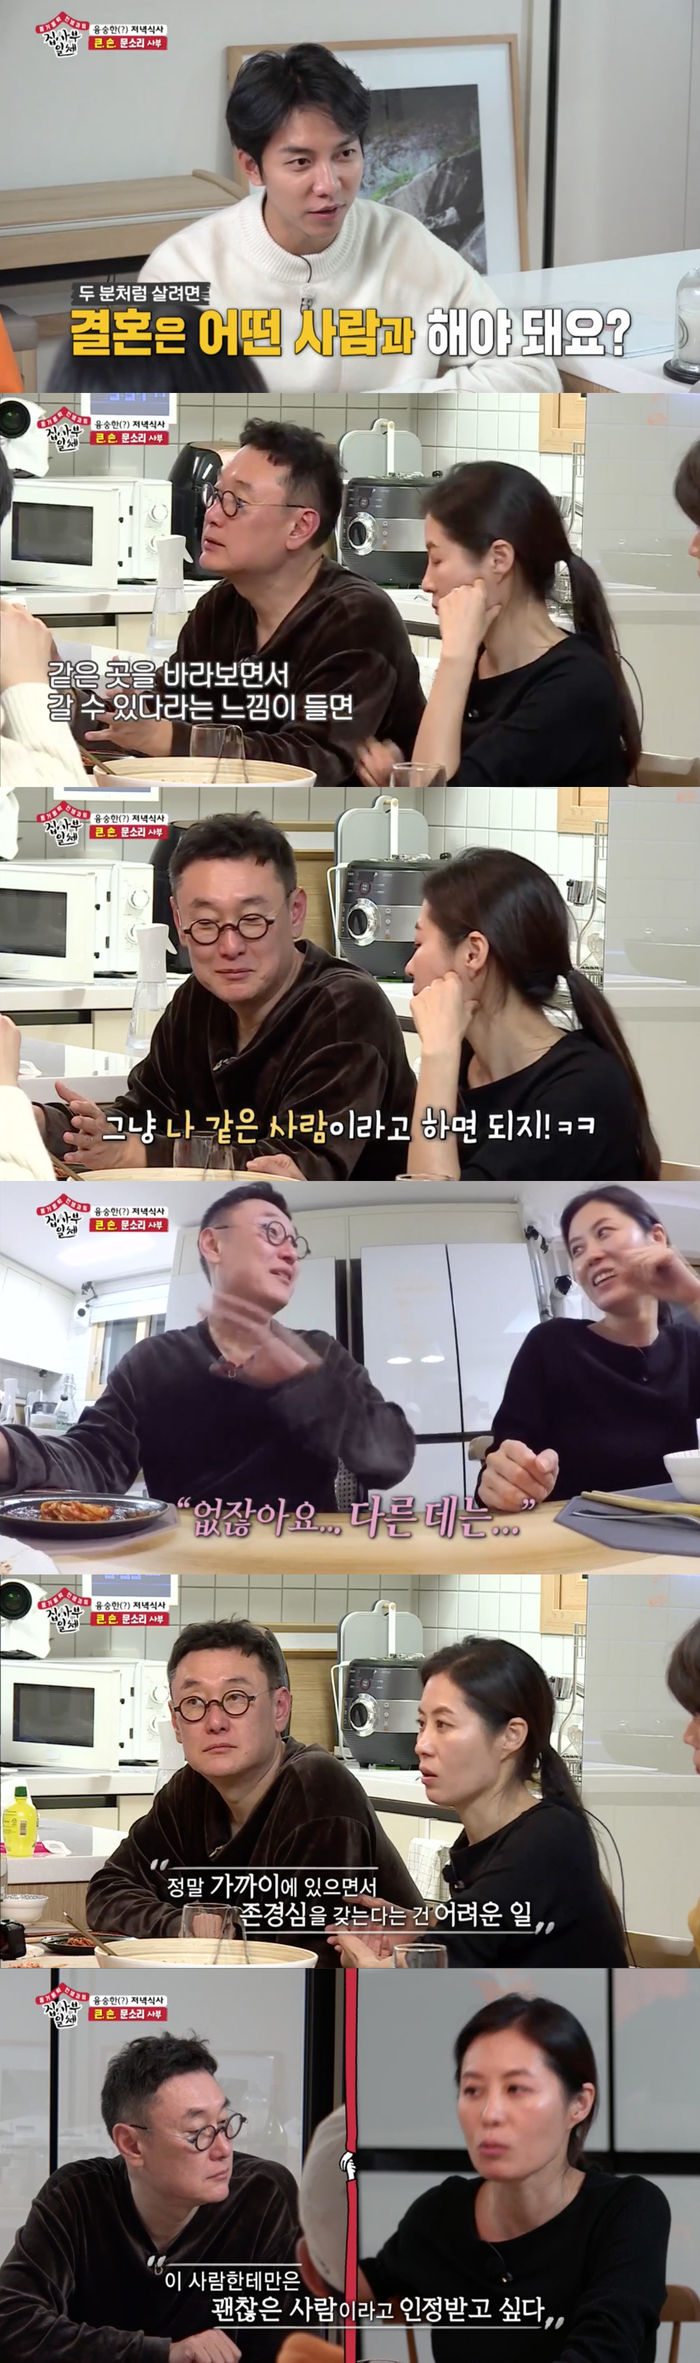 What is the ideal actor Jang Joon-hwan thinks?On SBS All The Butlers broadcast on the 5th, Master Moon So-ri and Jang Joon-hwan talked about desirable couple.On this day, Lee Seung-gi could not hide his envy by watching Jang Joon-hwan and Moon So-ri Couple, which show samples of model couple.Who should marriage be with? he asked.If you feel like you can go looking at the same place, then you can solve the rest, said Jang Joon-hwan.Moon So-ri then said, What are you saying so long? You can say youre like me.Jang Joon-hwan said, There is no other place. He made Moon So-ri a heartbreaker.It is the first time since Jae Seok has been in this position, Lee Seung-gi said, It is great that there is no hesitation. Moon So-ri also asked if there is a conflict between the couple, saying, If I do not have a desire to beat you now, it will take a little time, but at some point it will be tailored.There are not many people who are close and respectful.There are a lot of people who are far away, he said. It is difficult to be really close and respectful.Also, Moon So-ri said, So I have such a mind that I want to be recognized as a good person for that person.So I try to live with my best, he said. I do not know what will happen in the future, but my husband still has a respectable side. 